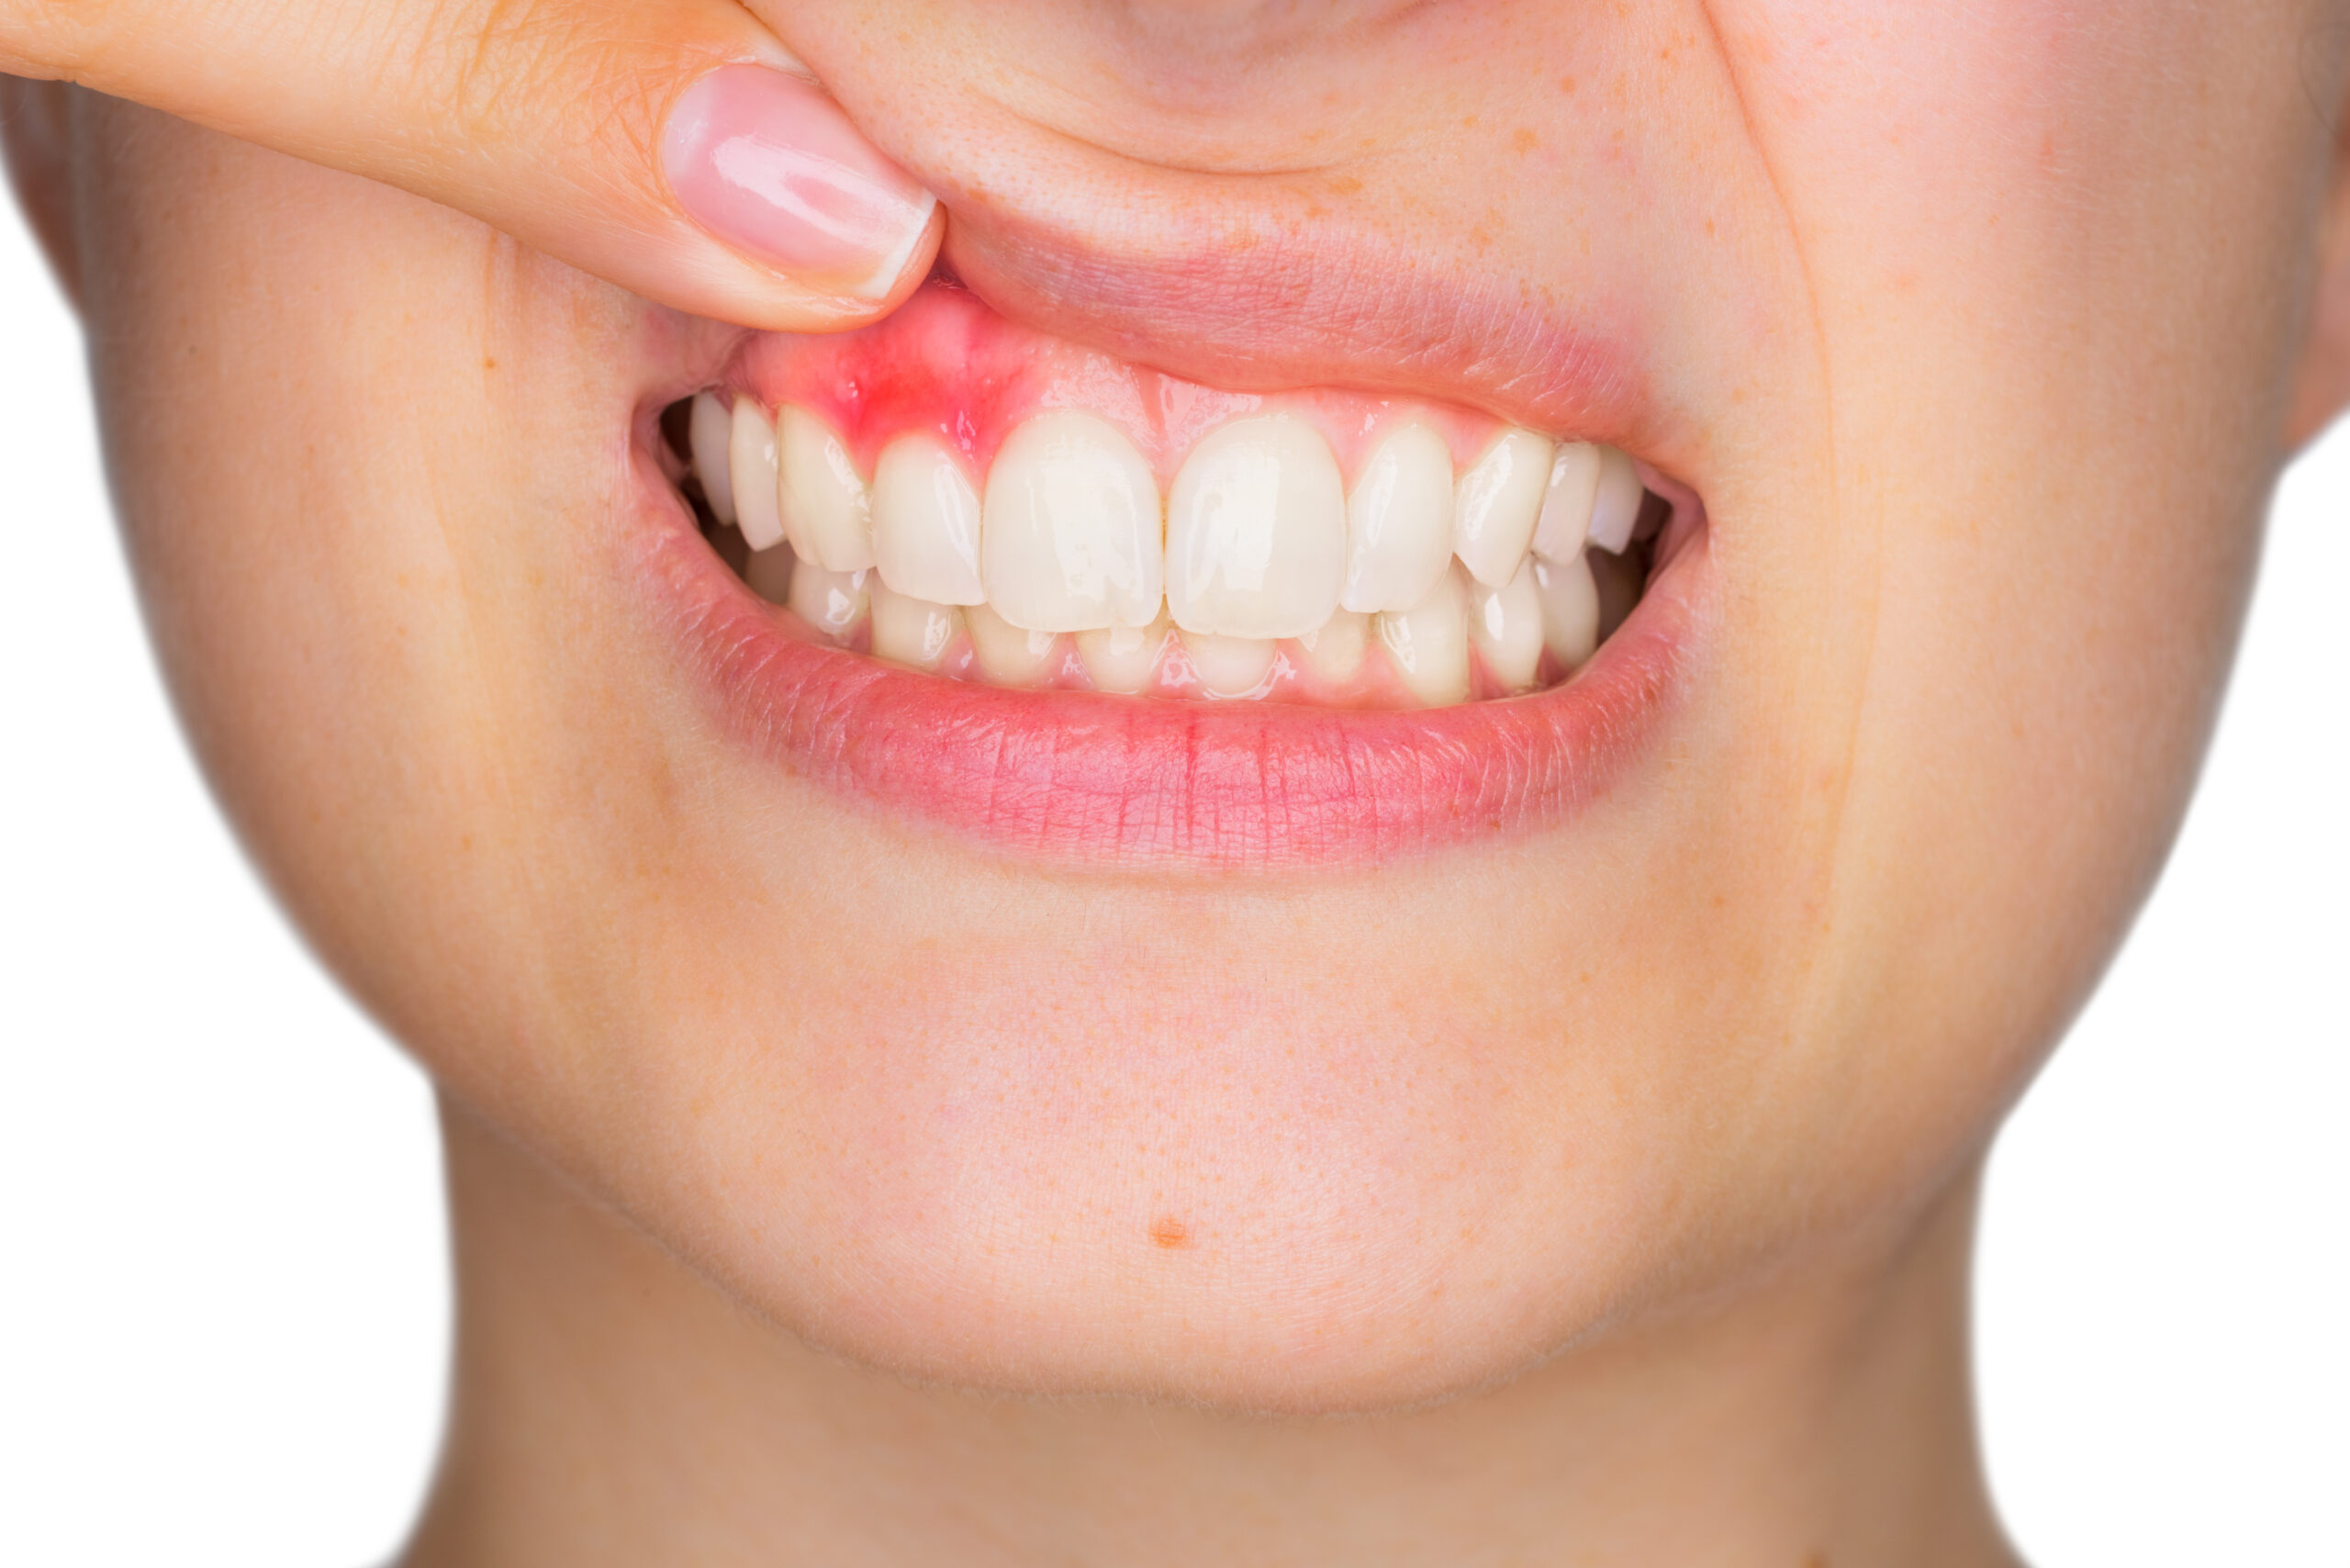 Is Periodontal Disease Causing Your Tooth Sensitivity?